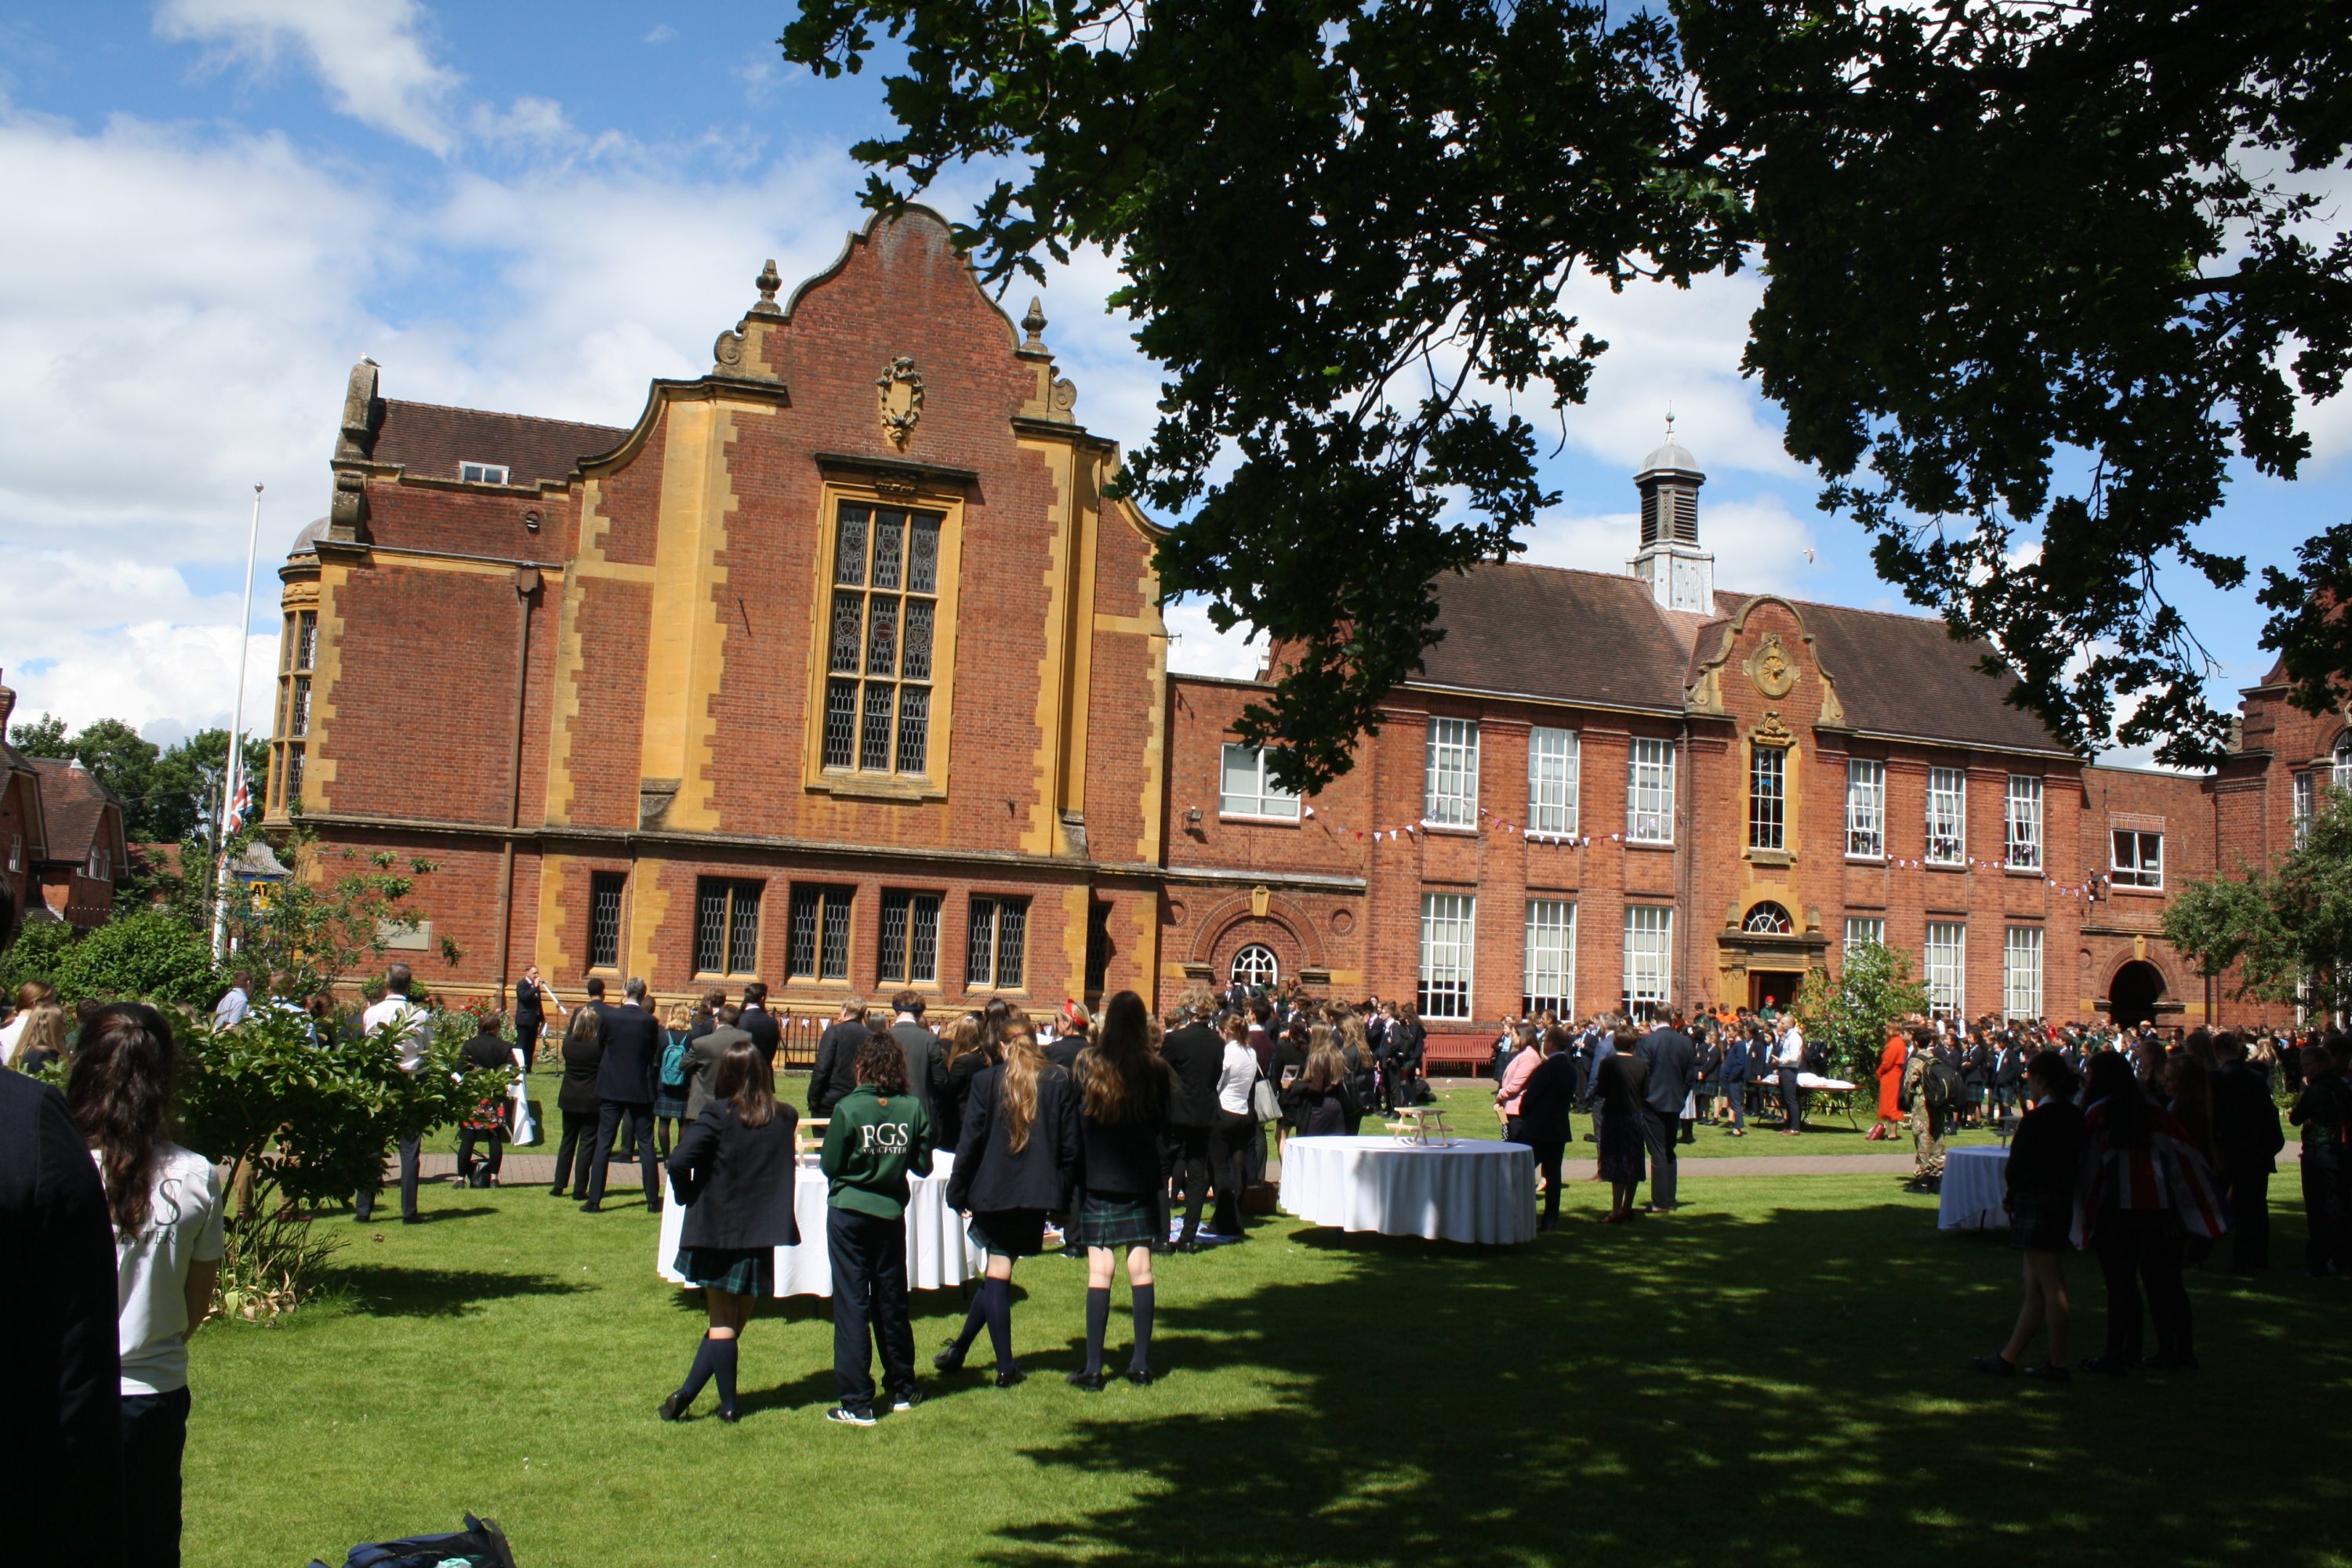 The sun shone for the RGS Celebration of the Platinum Jubilee of Her Majesty The Queen